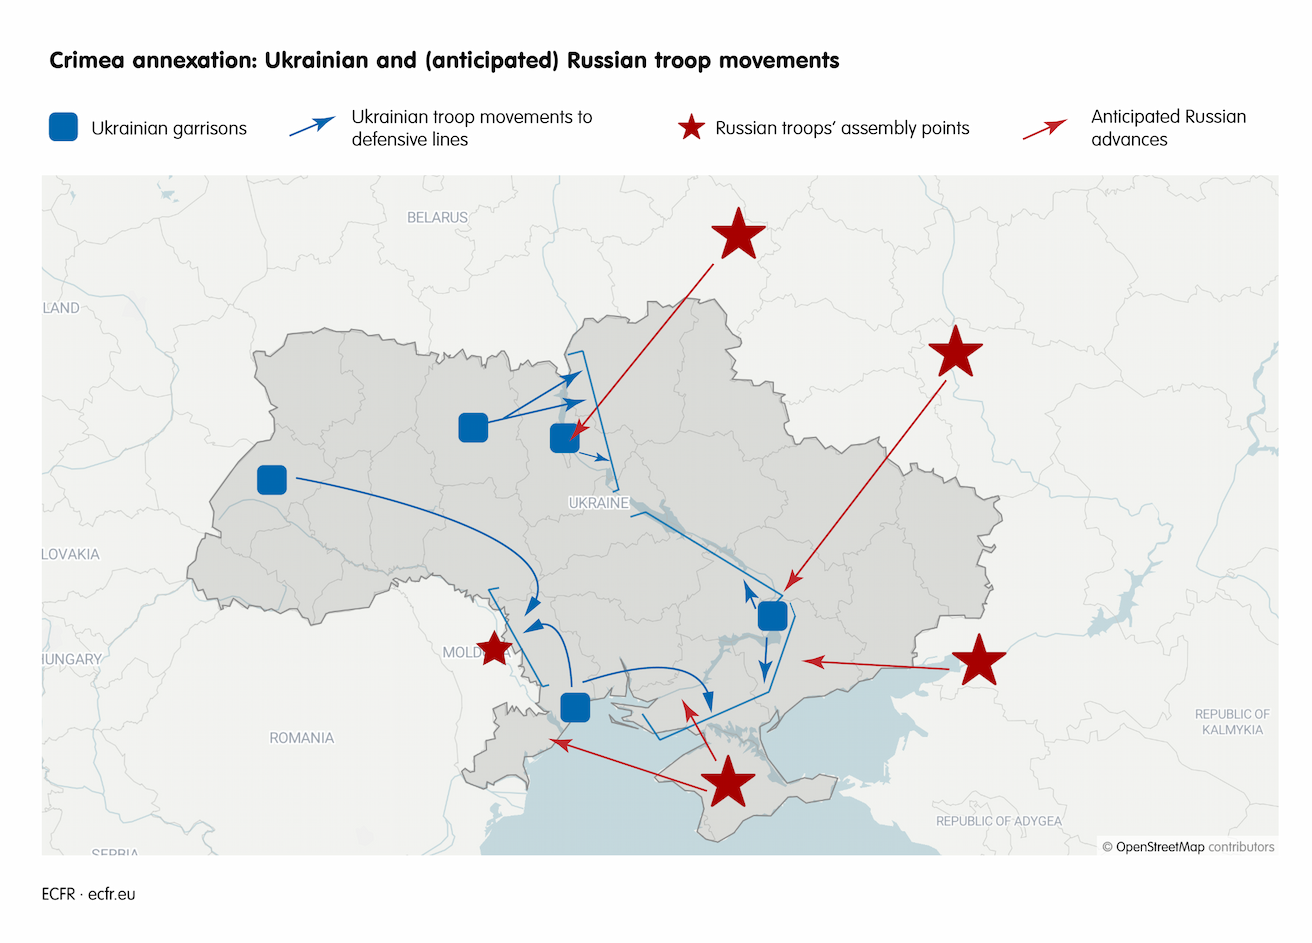 Crimea annexation: map of Ukrainian and (anticipated) Russian troop movements